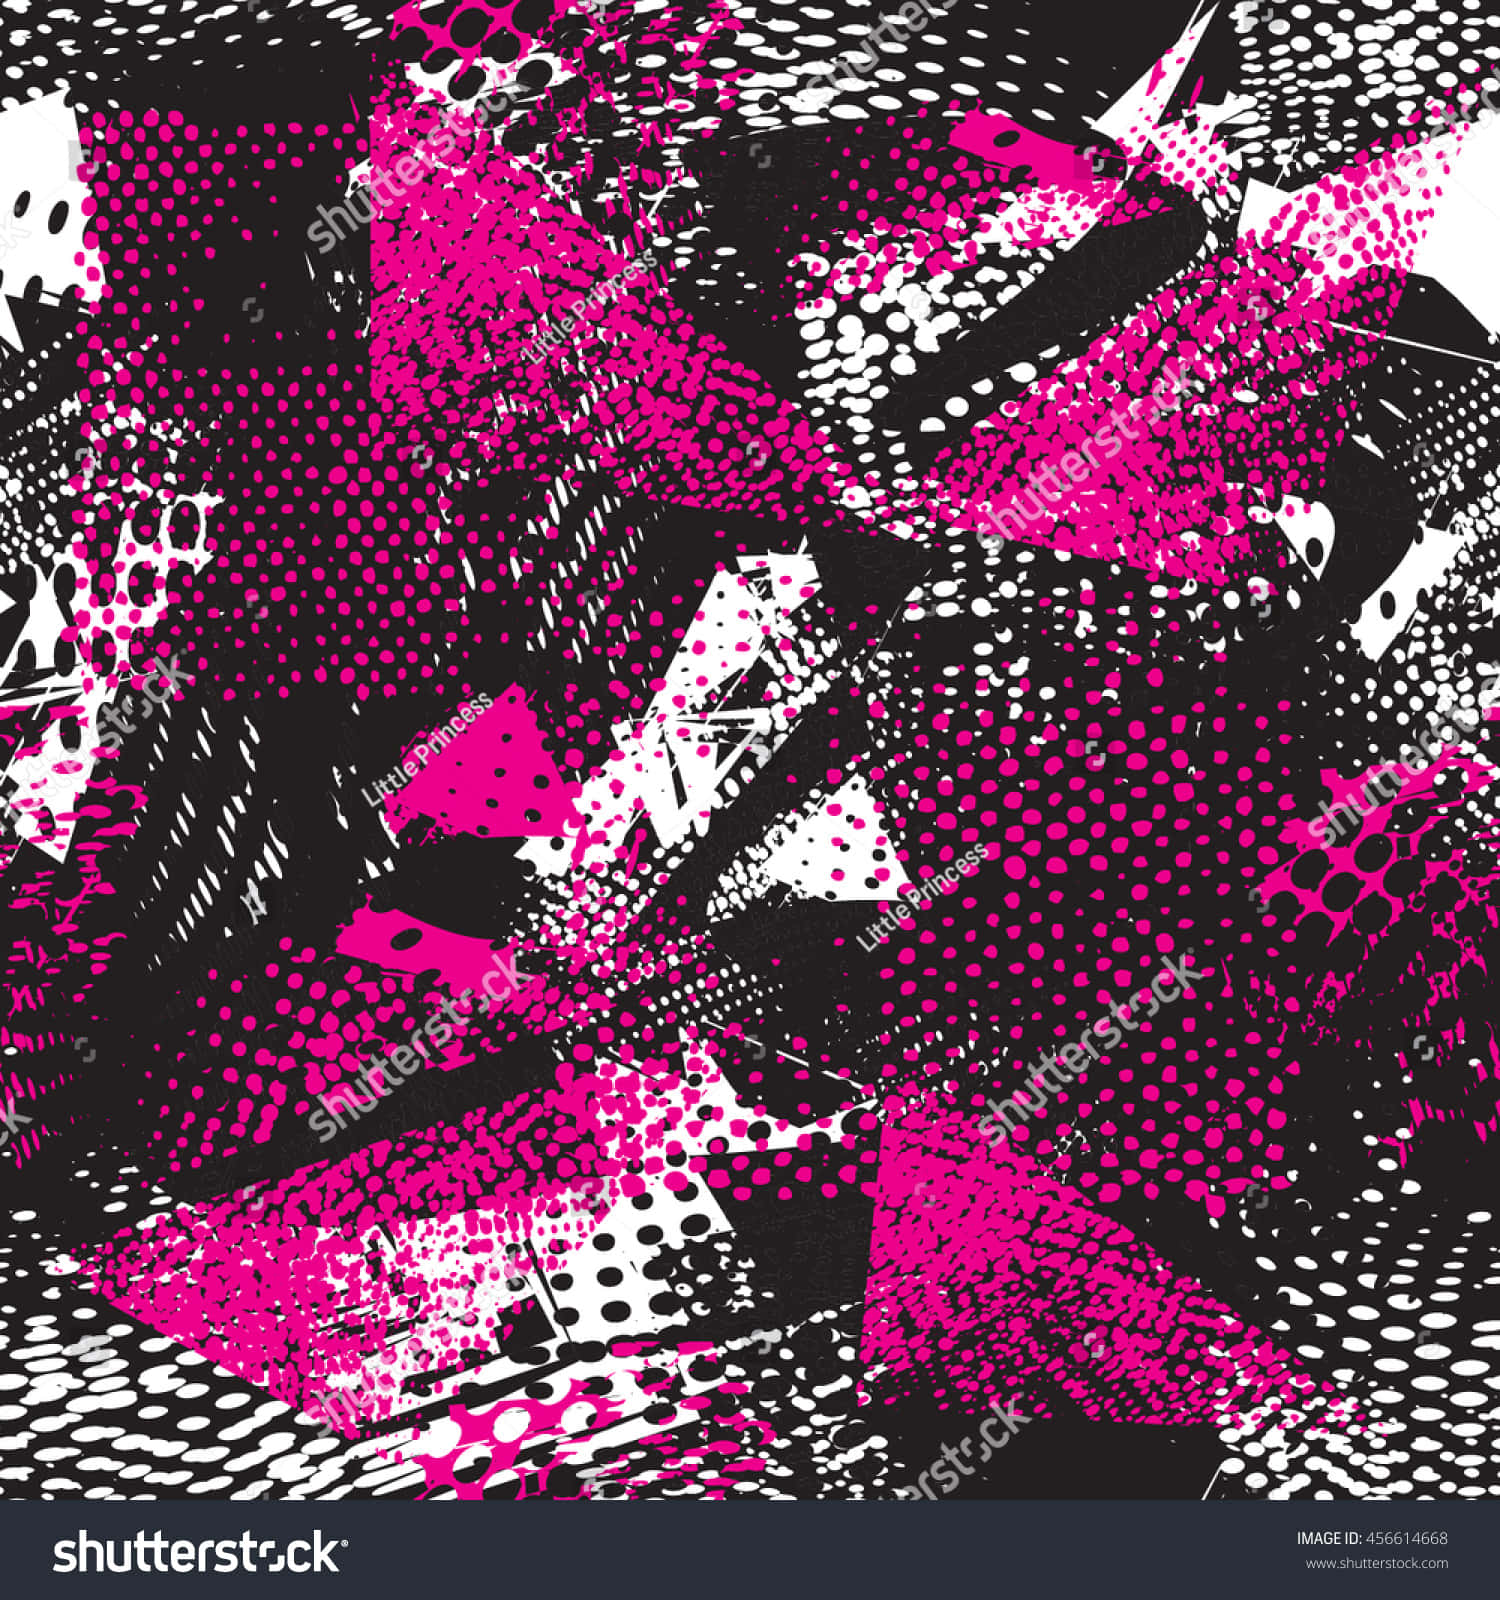 An abstract pattern of pink, black, and white colors. Wallpaper